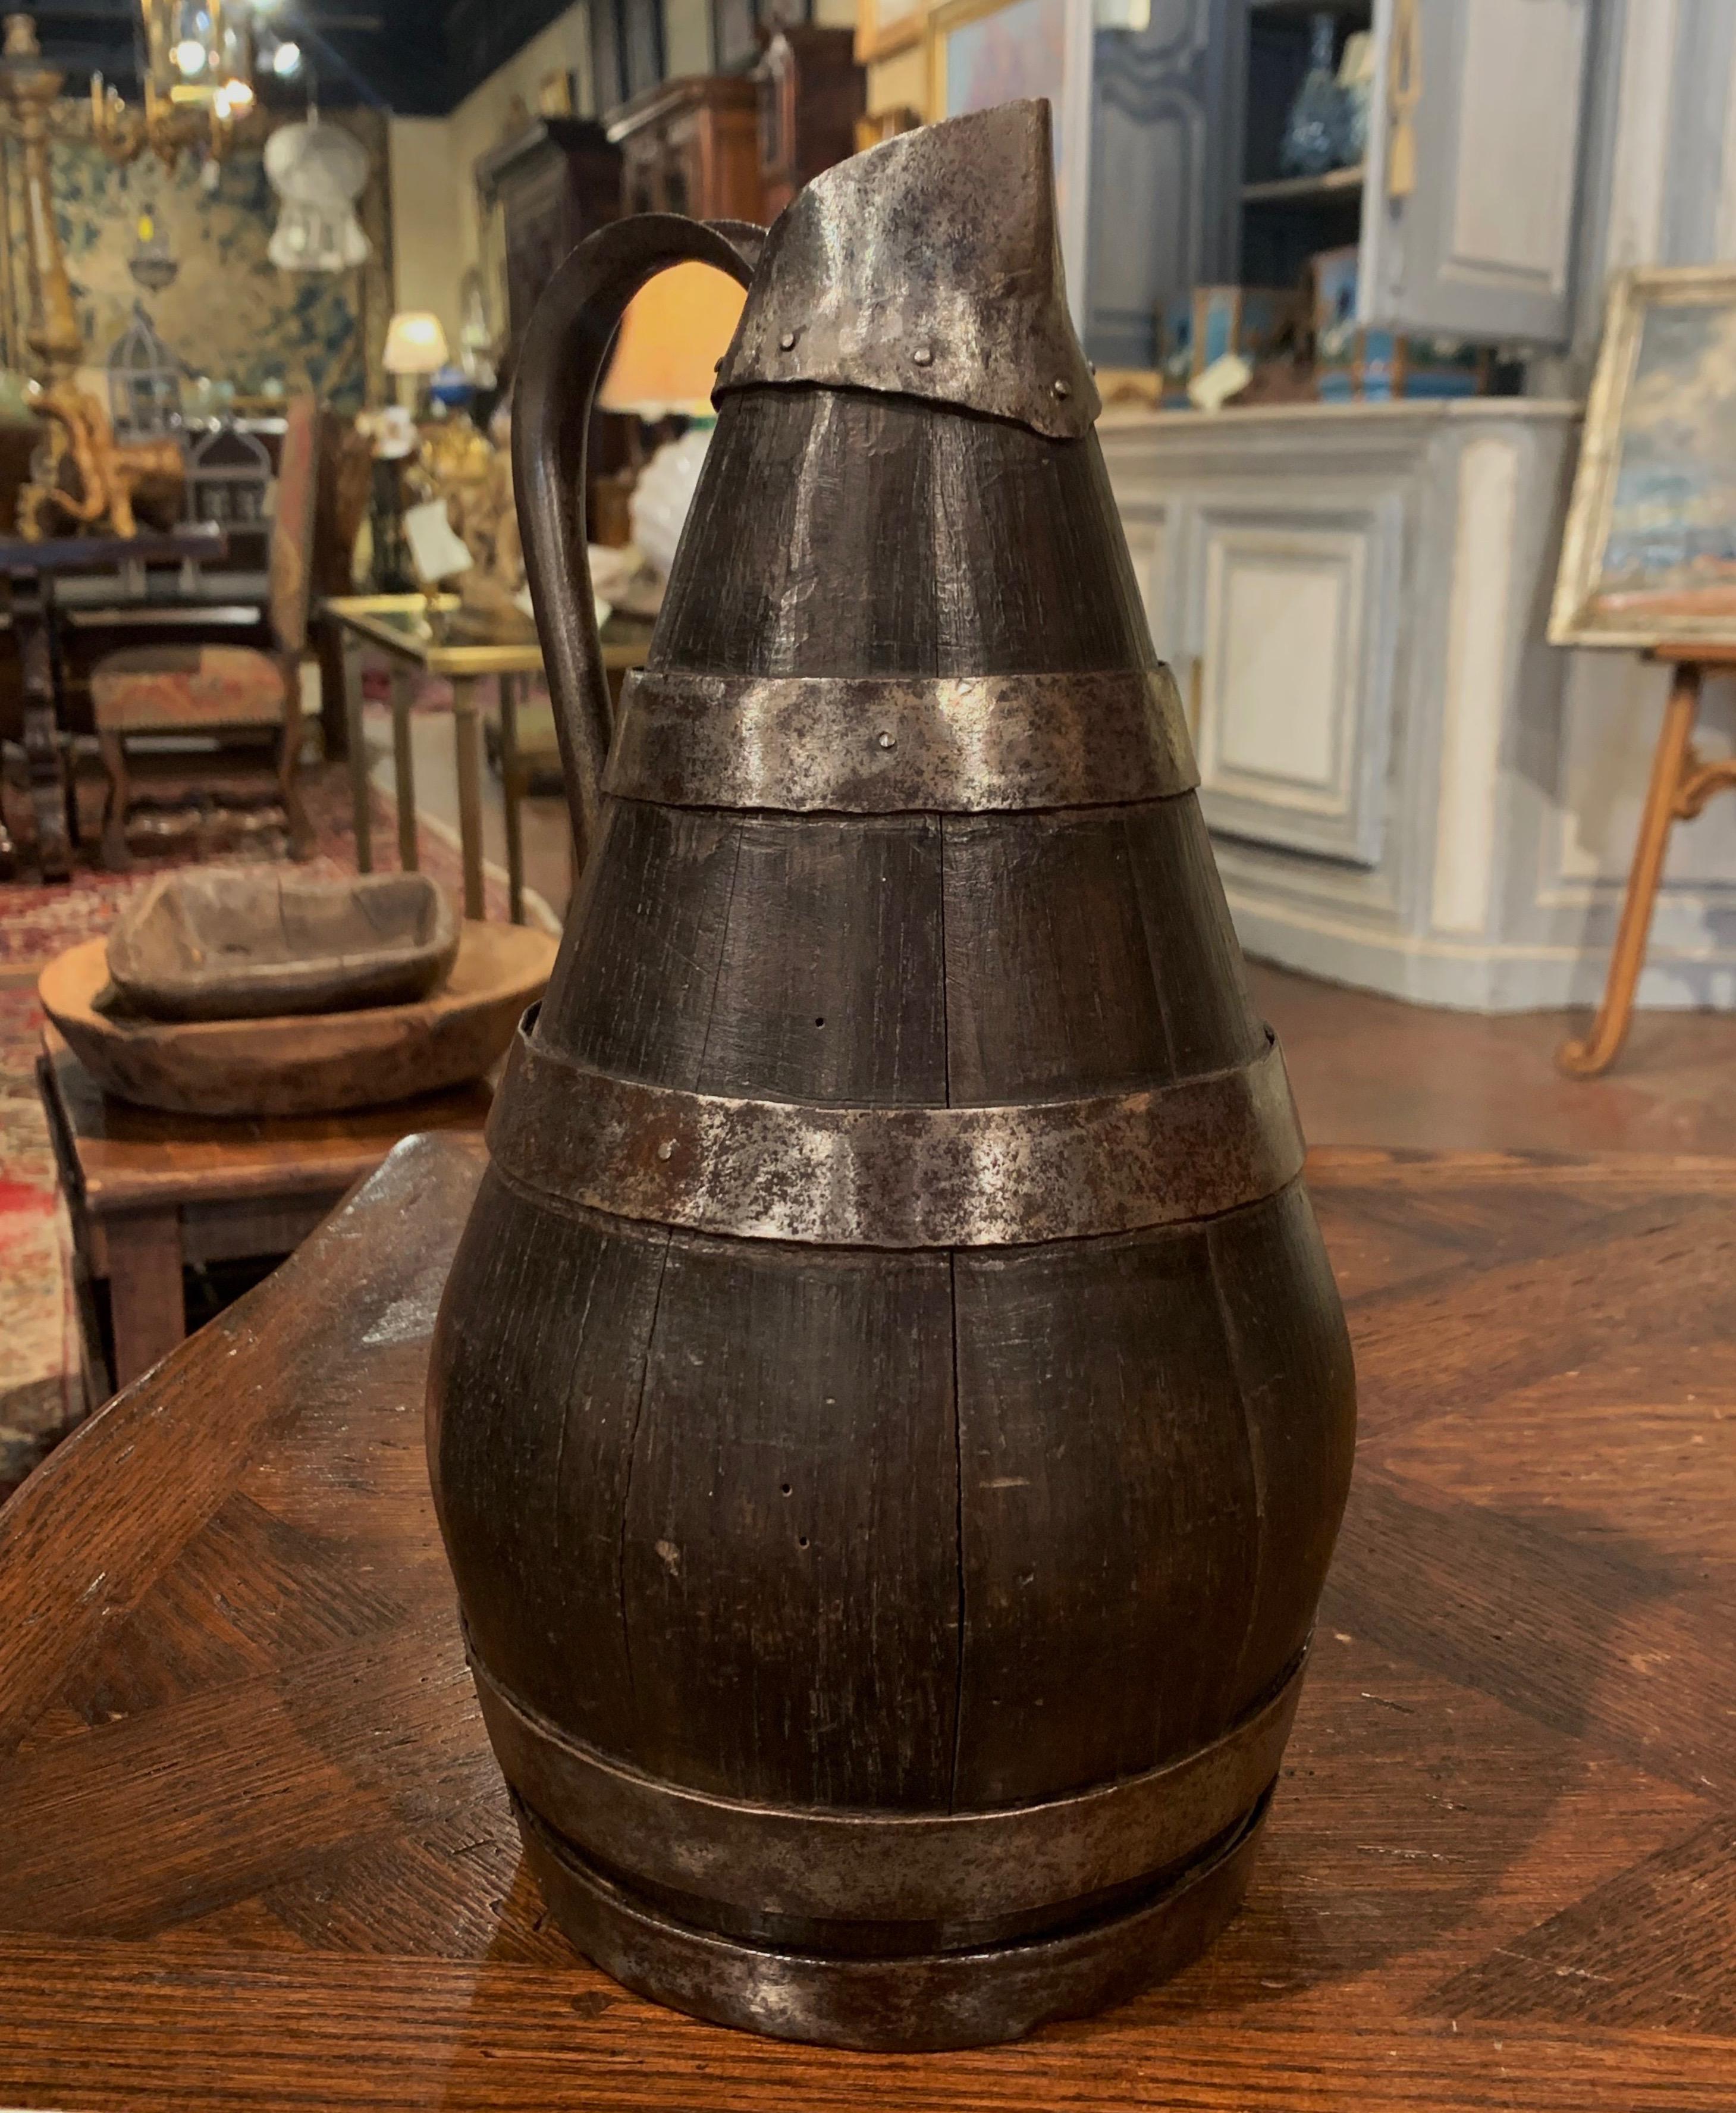 Accessorize your wine cellar or wet bar with this antique cider pitcher; crafted in Normandy France circa 1870, the pitcher is made of barrel oak decorated with polished metal rings. The cider pitcher, further embellished with a metal handle, is in